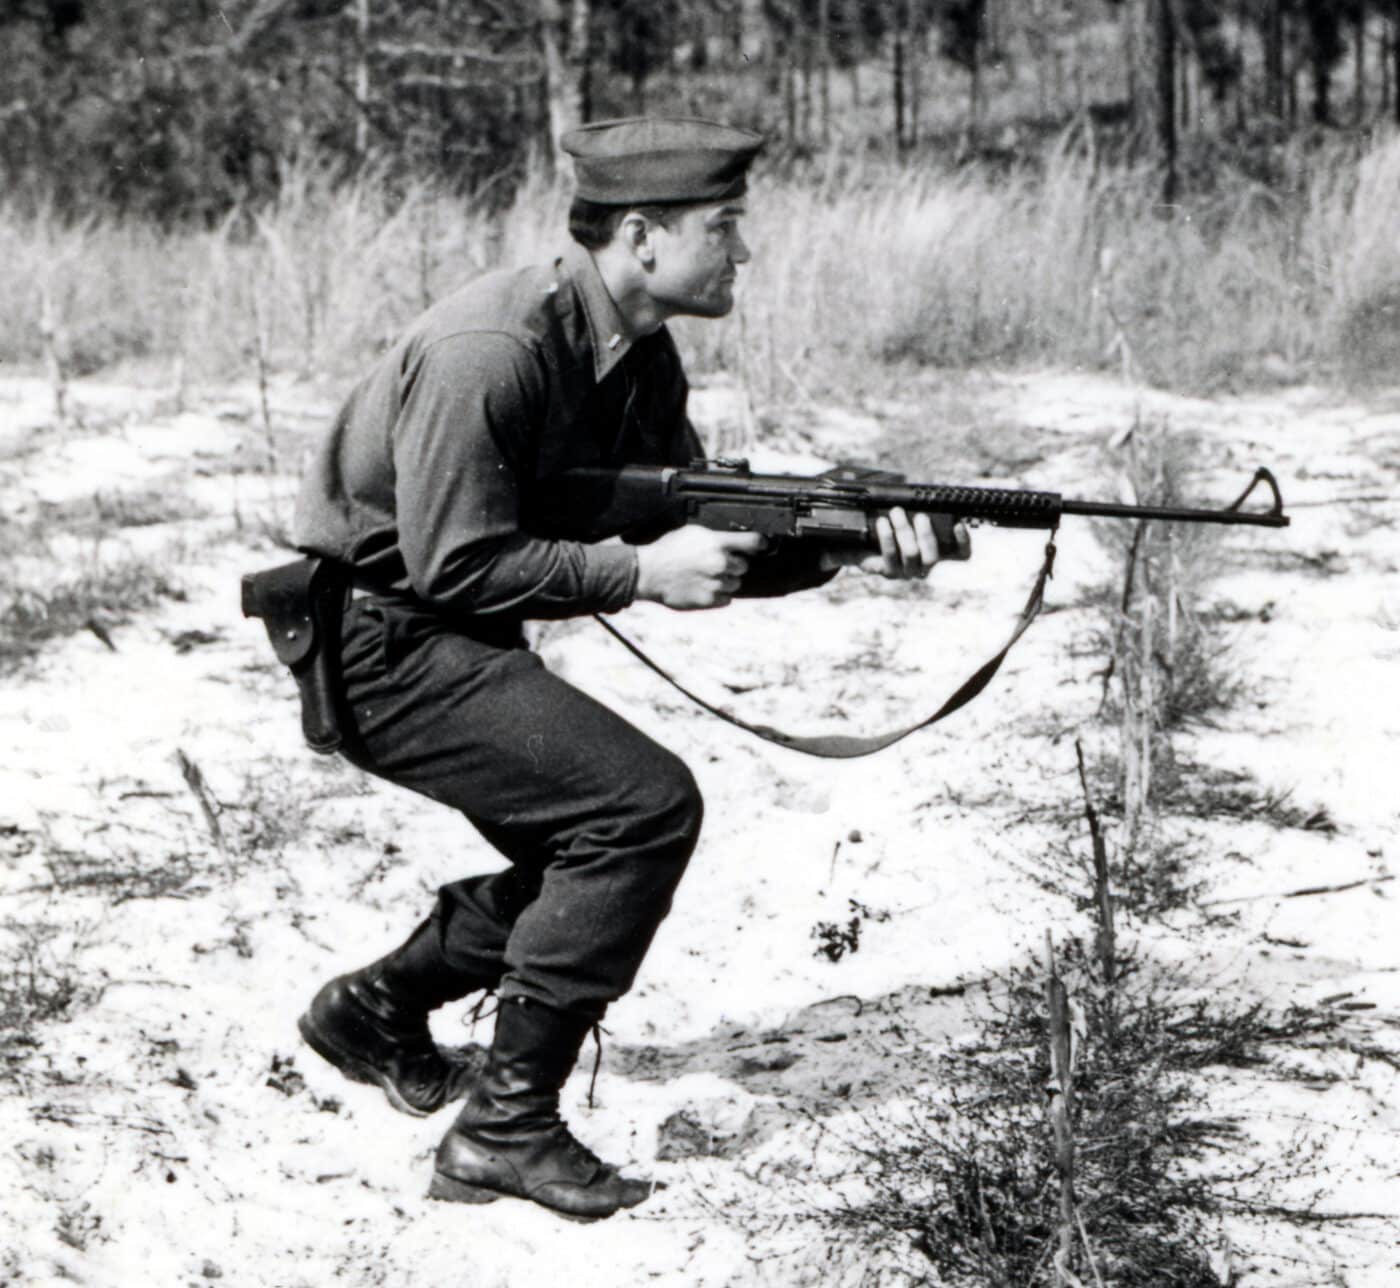 Here we see a USMC paramarine training with M1941 LMG in North Carolina prior to deployment to the Pacific Theater of Operations.